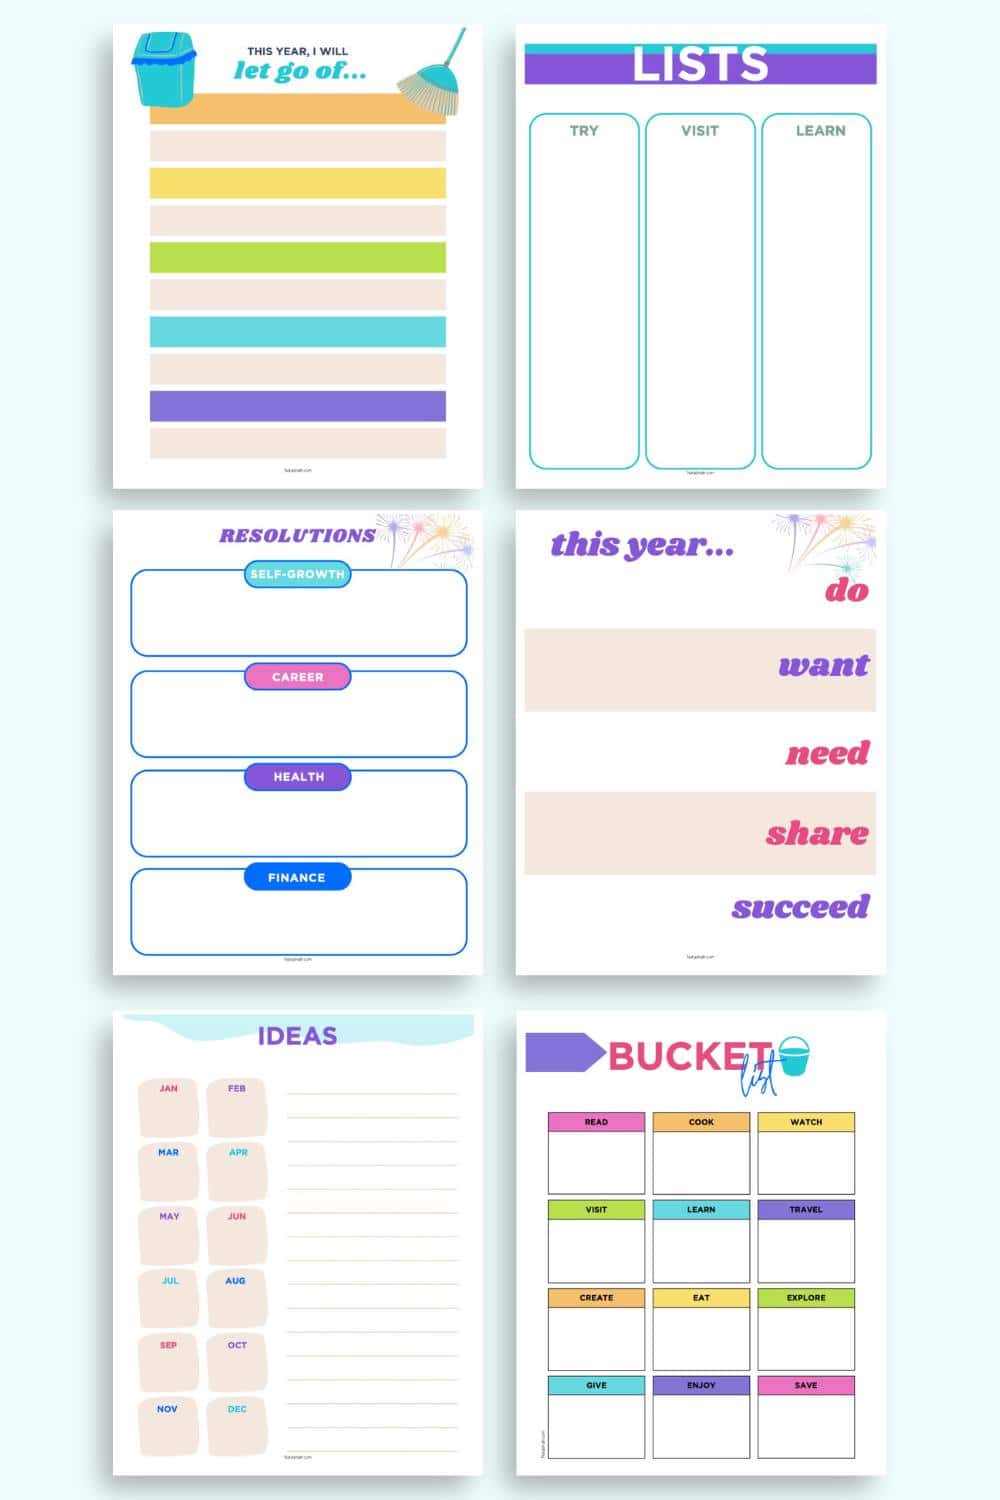 A preview of six goals planer pages including: Lists 

try, visit, and learn

Letting go 

things to stop doing for personal growth

New Year's resolutions worksheet by category

"This year..." (do, want, need, share, succeed

Ideas for each month of the following year 

Bucket list